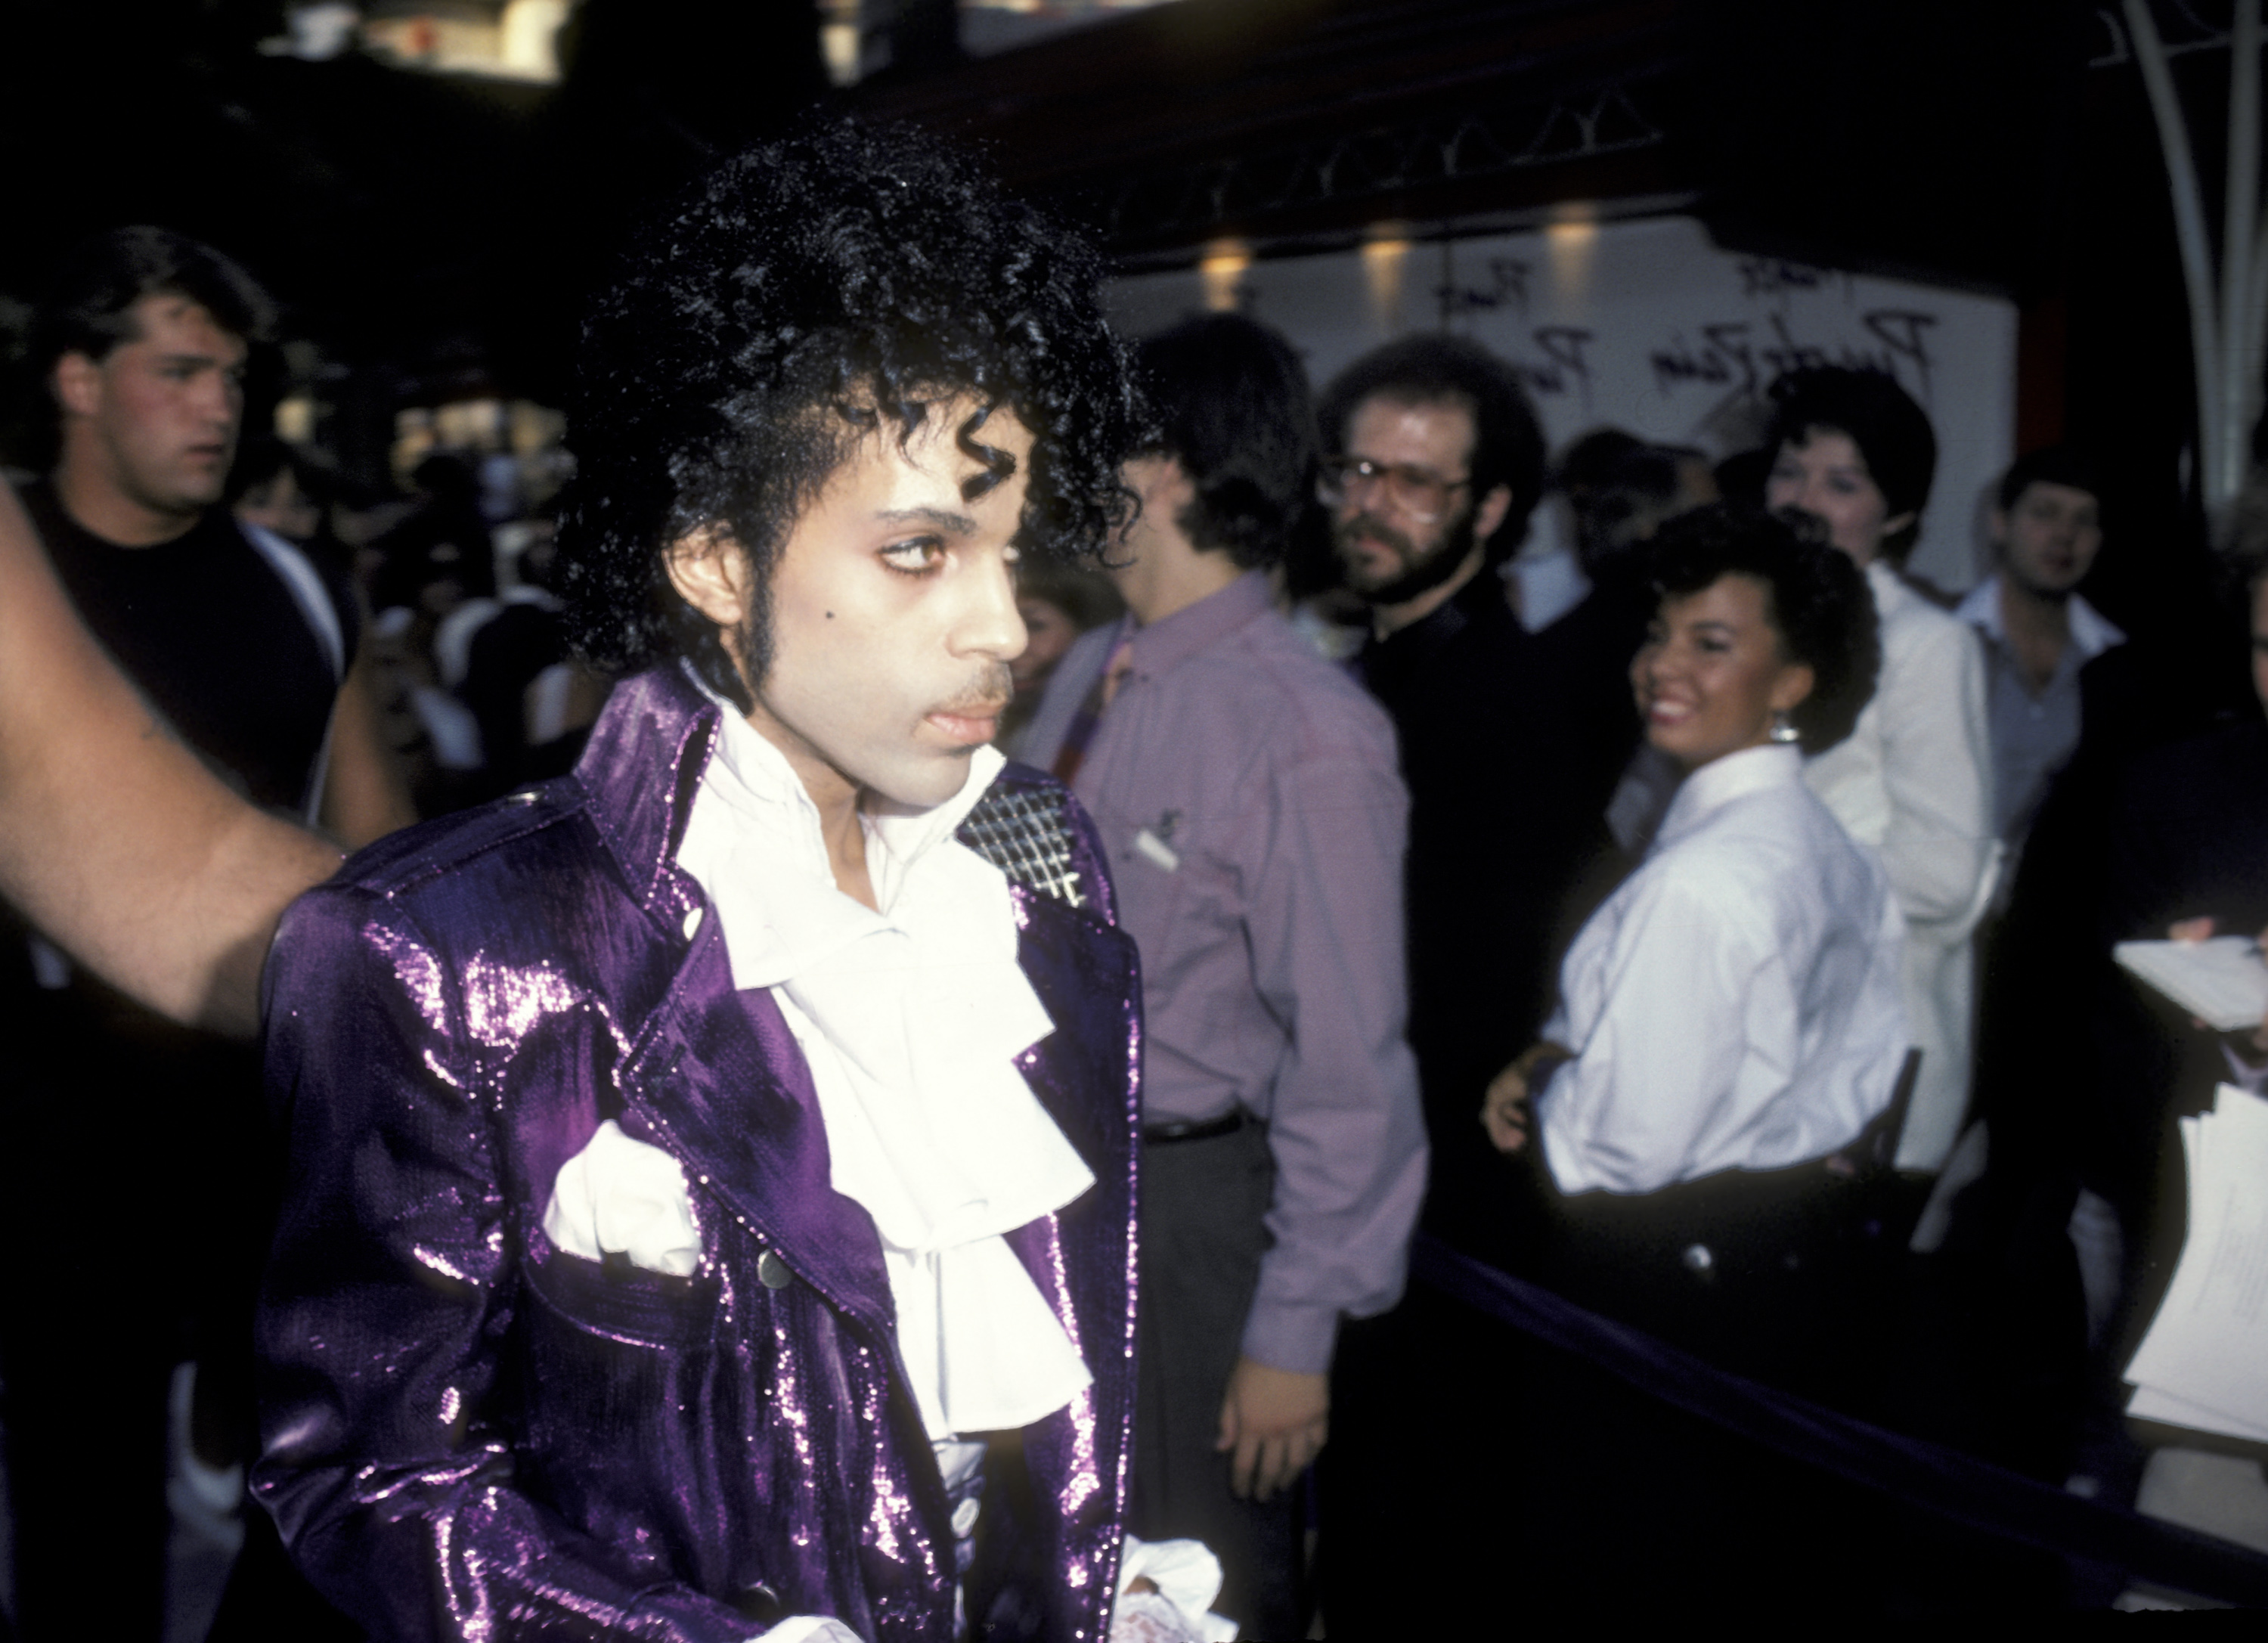 HOLLYWOOD - JULY 26: Musician Prince attending the premiere of 'Purple Rain' on July 26, 1984 at Mann Chinese Theater in Hollywood, California. (Photo by Ron Galella, Ltd./WireImage)